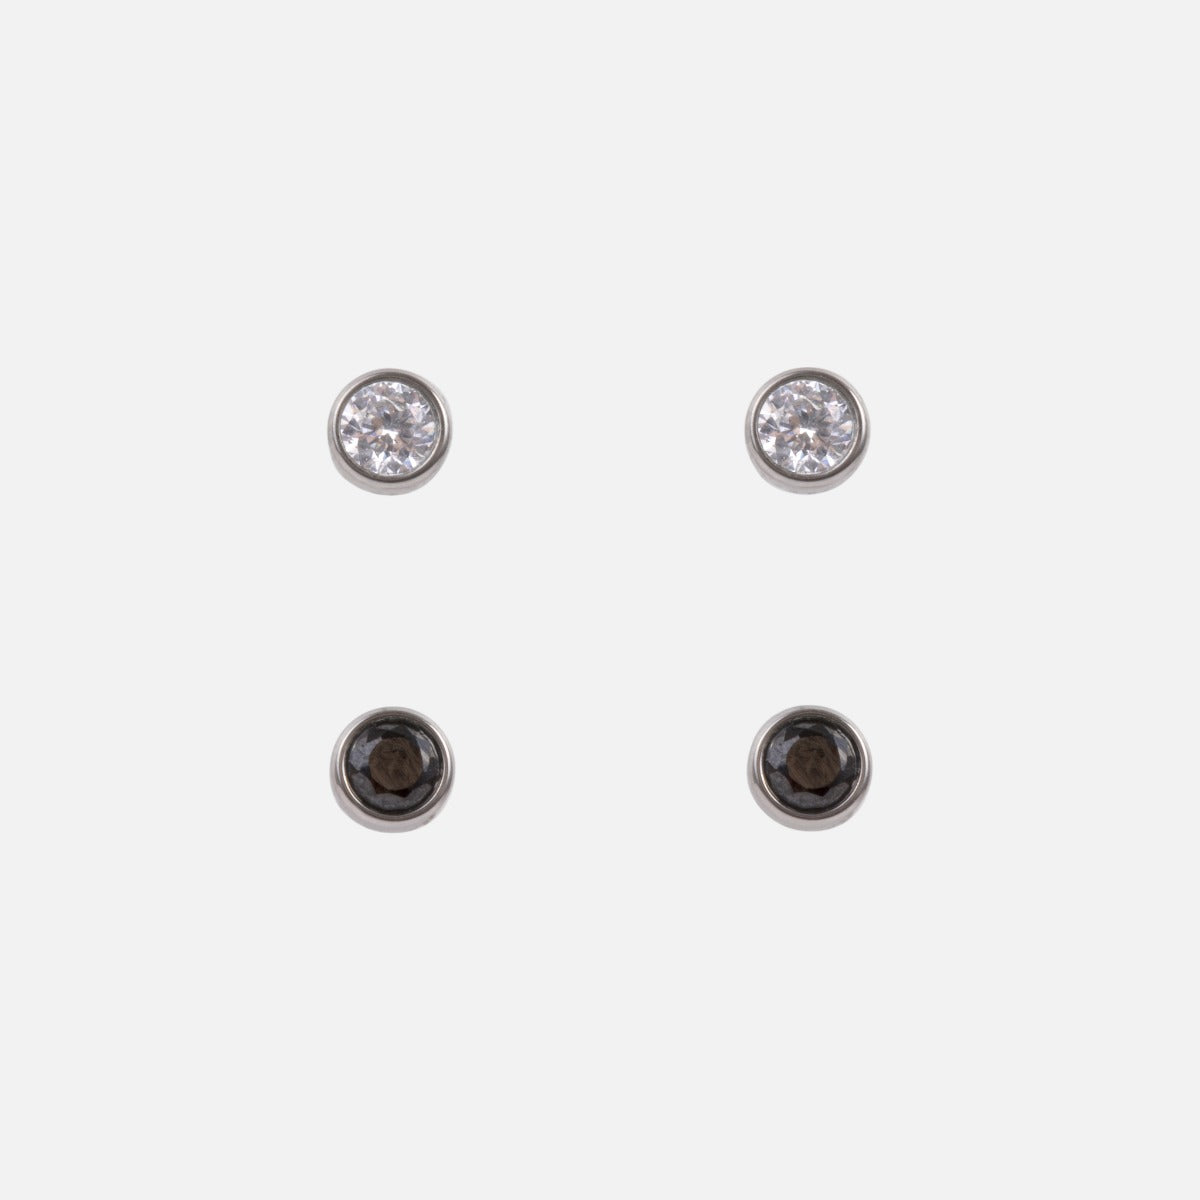 Set of two pairs of small round stainless steel earrings